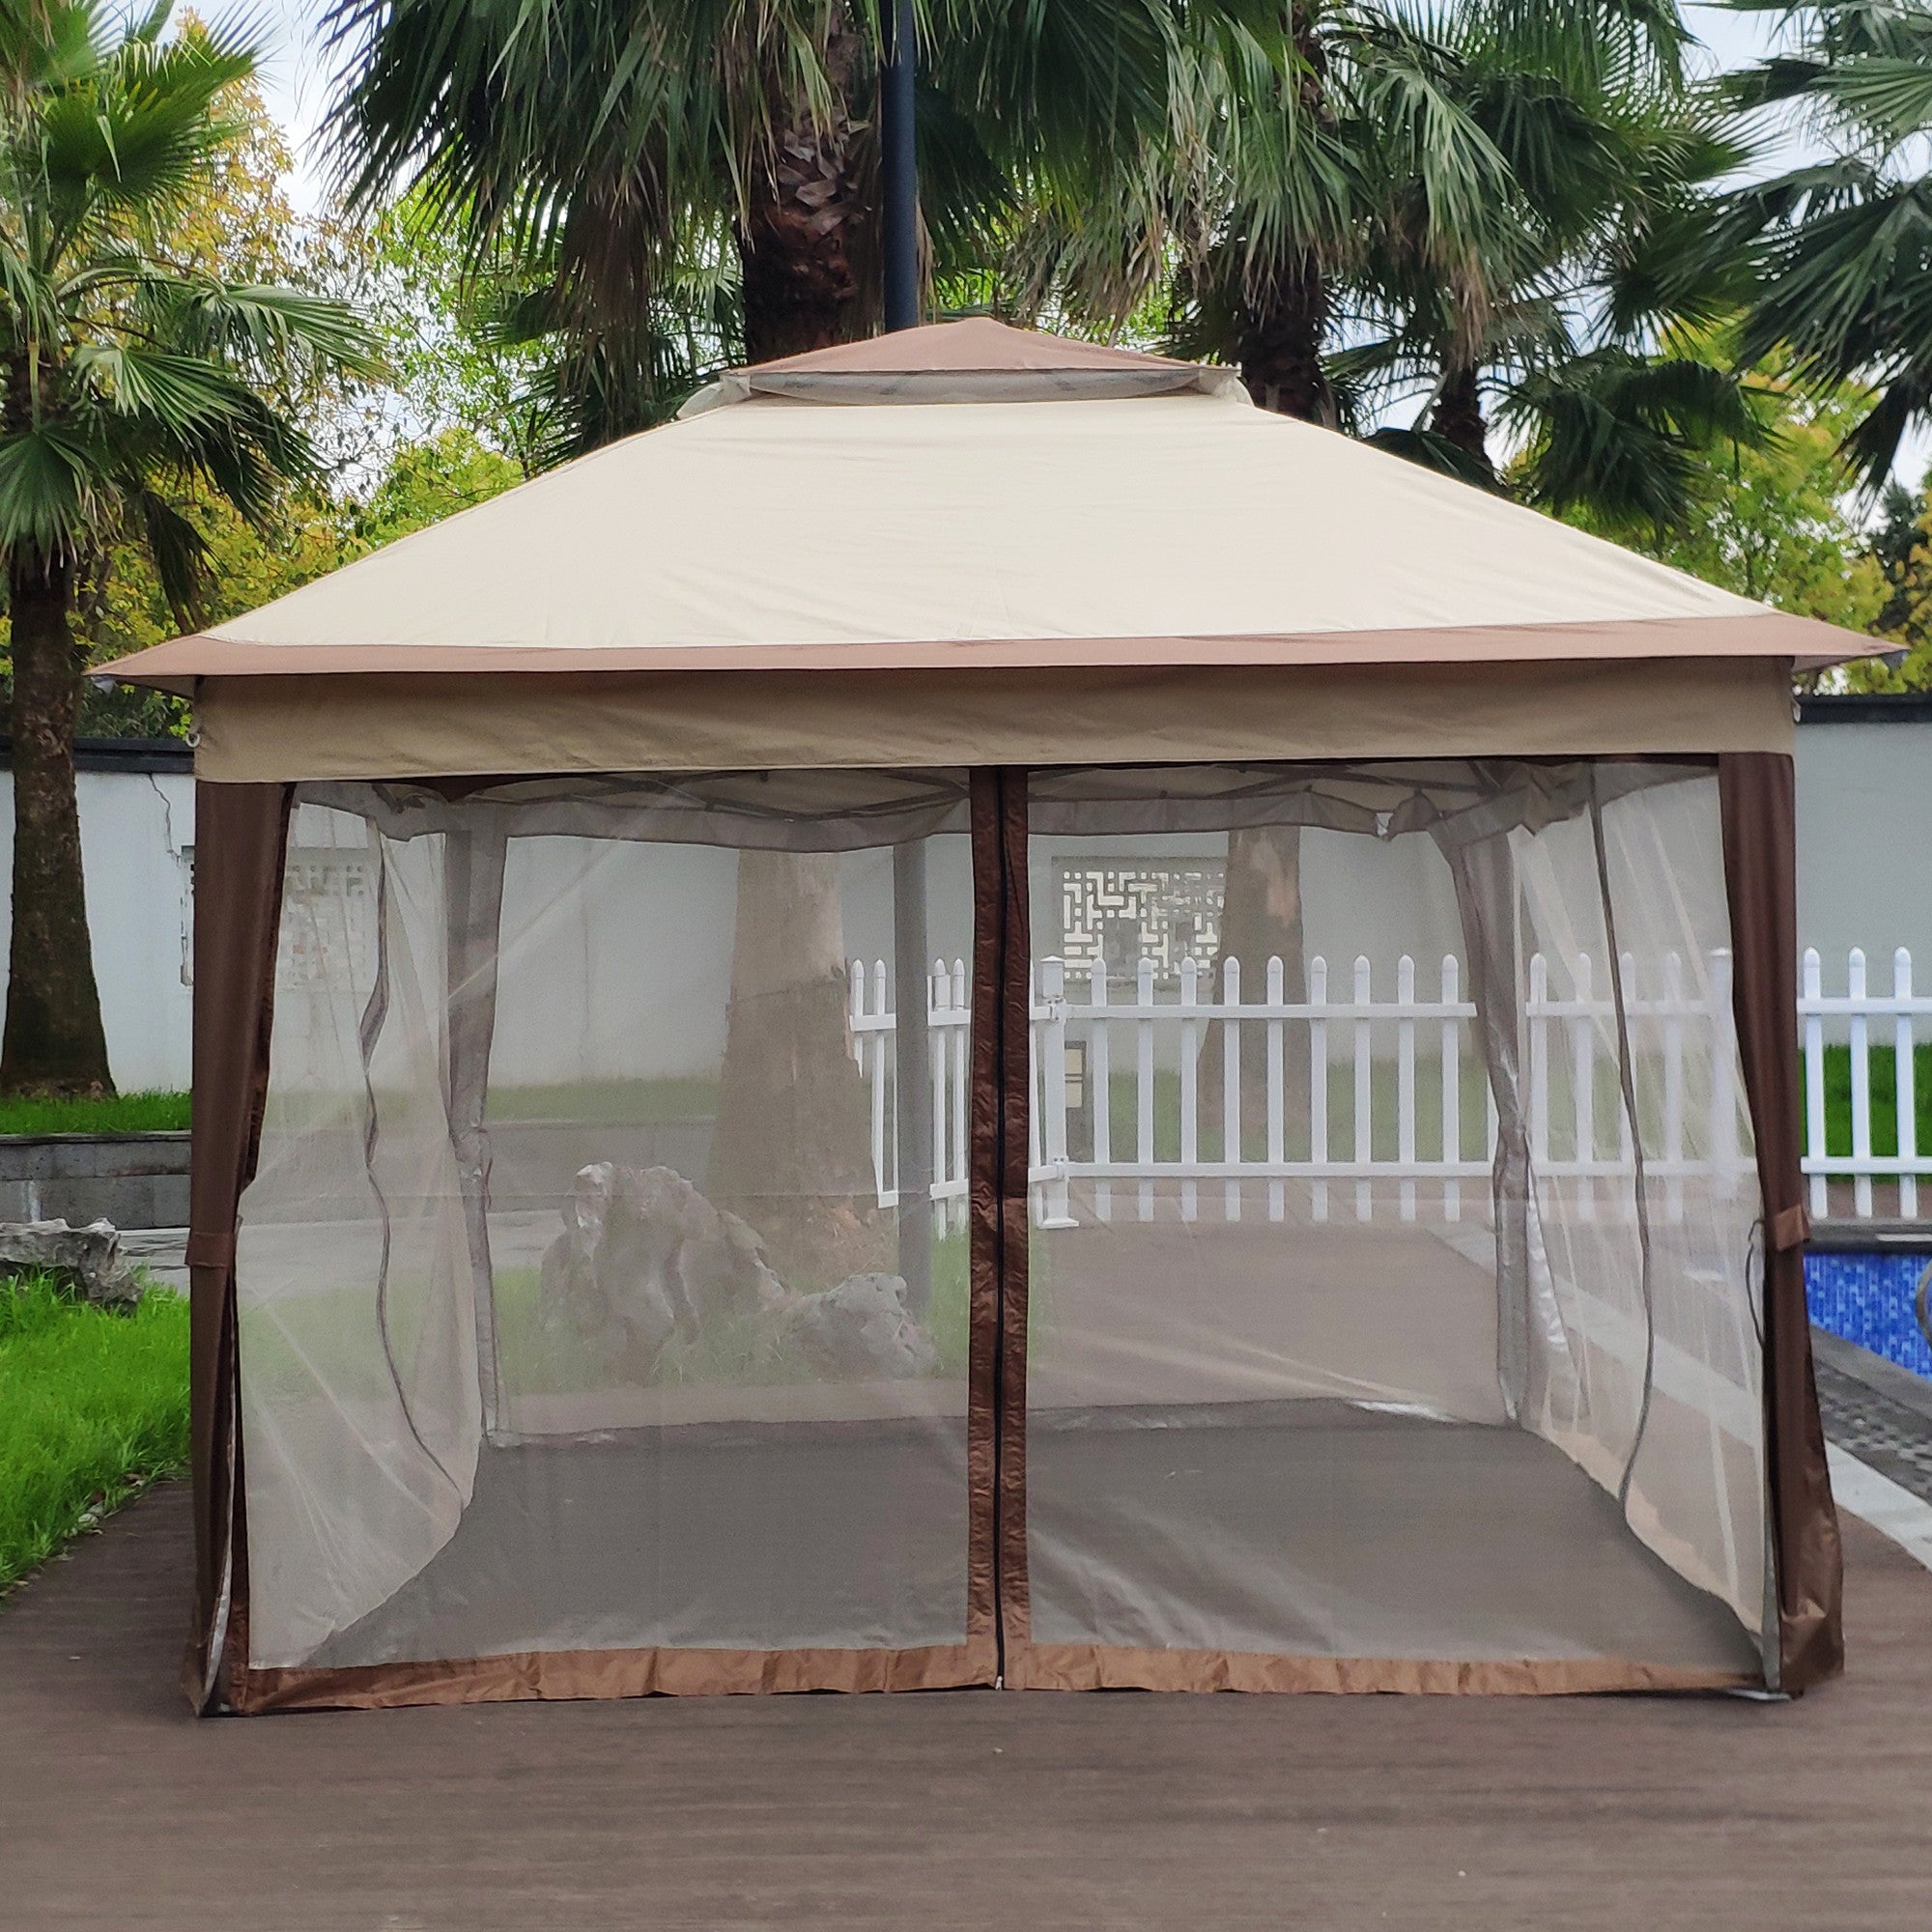 [KGORGE Plus]Outdoor 11ft x 11ft Pop Up Gazebo Canopy With Removable Zipper Netting, 2-Tier Soft Top Event Tent, Suitable For Patio Backyard Garden Camping Area, Coffee